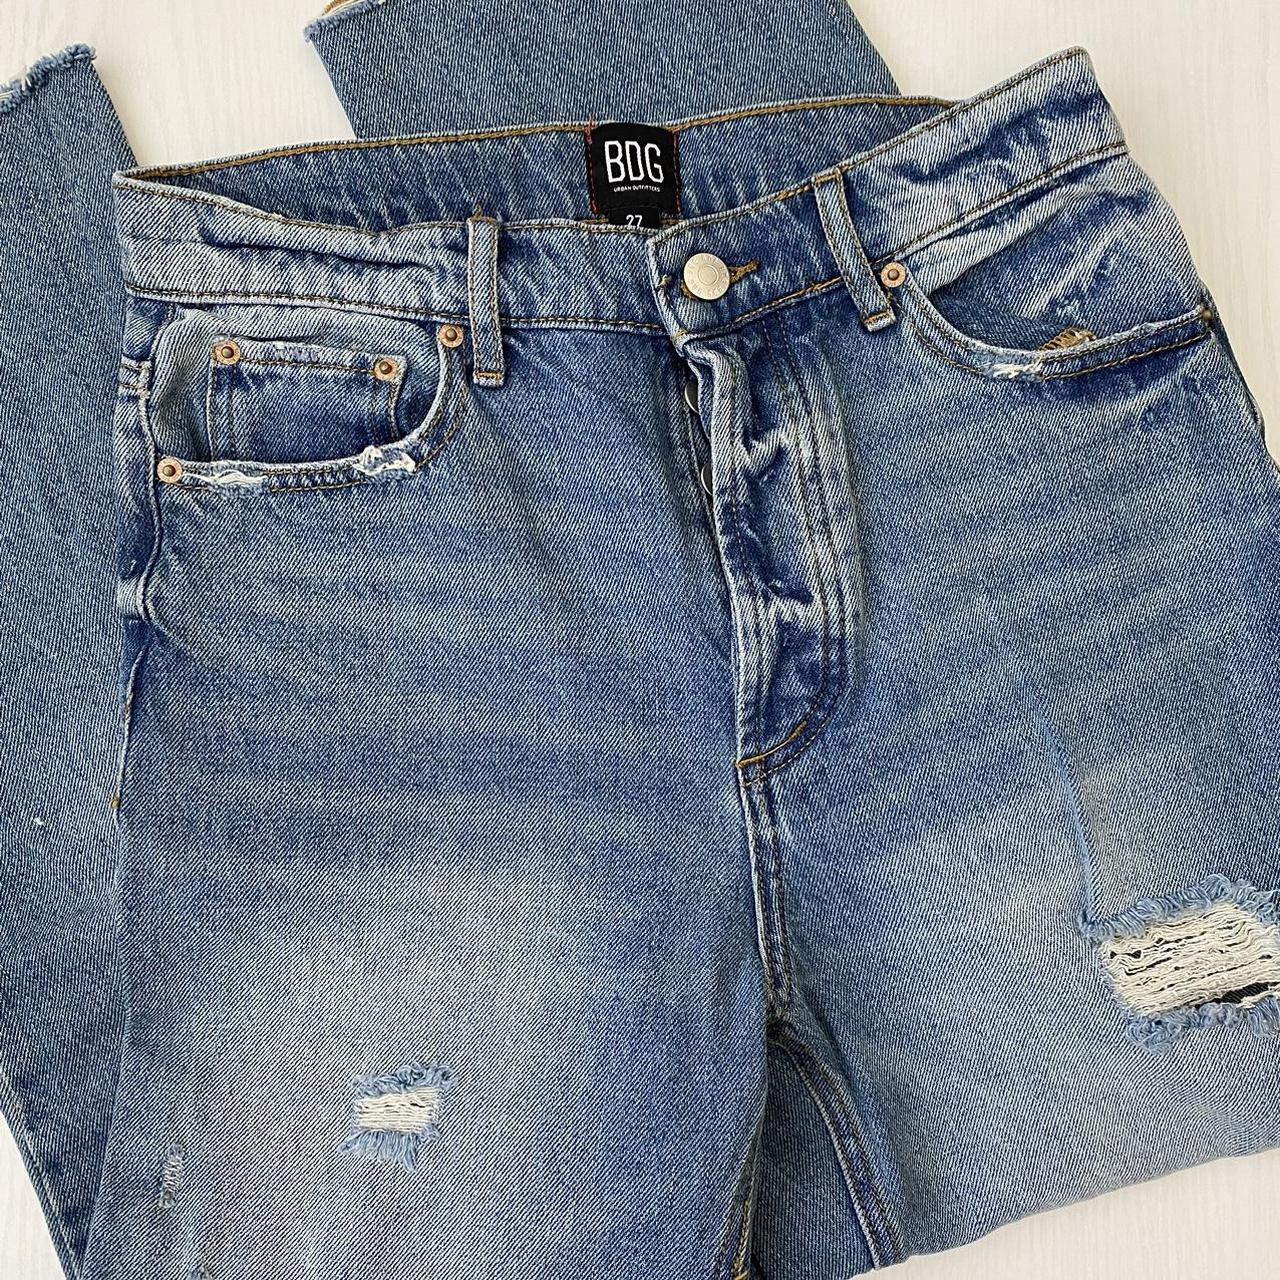 BDG Urban Outfitters - high waisted jeans Size... - Depop